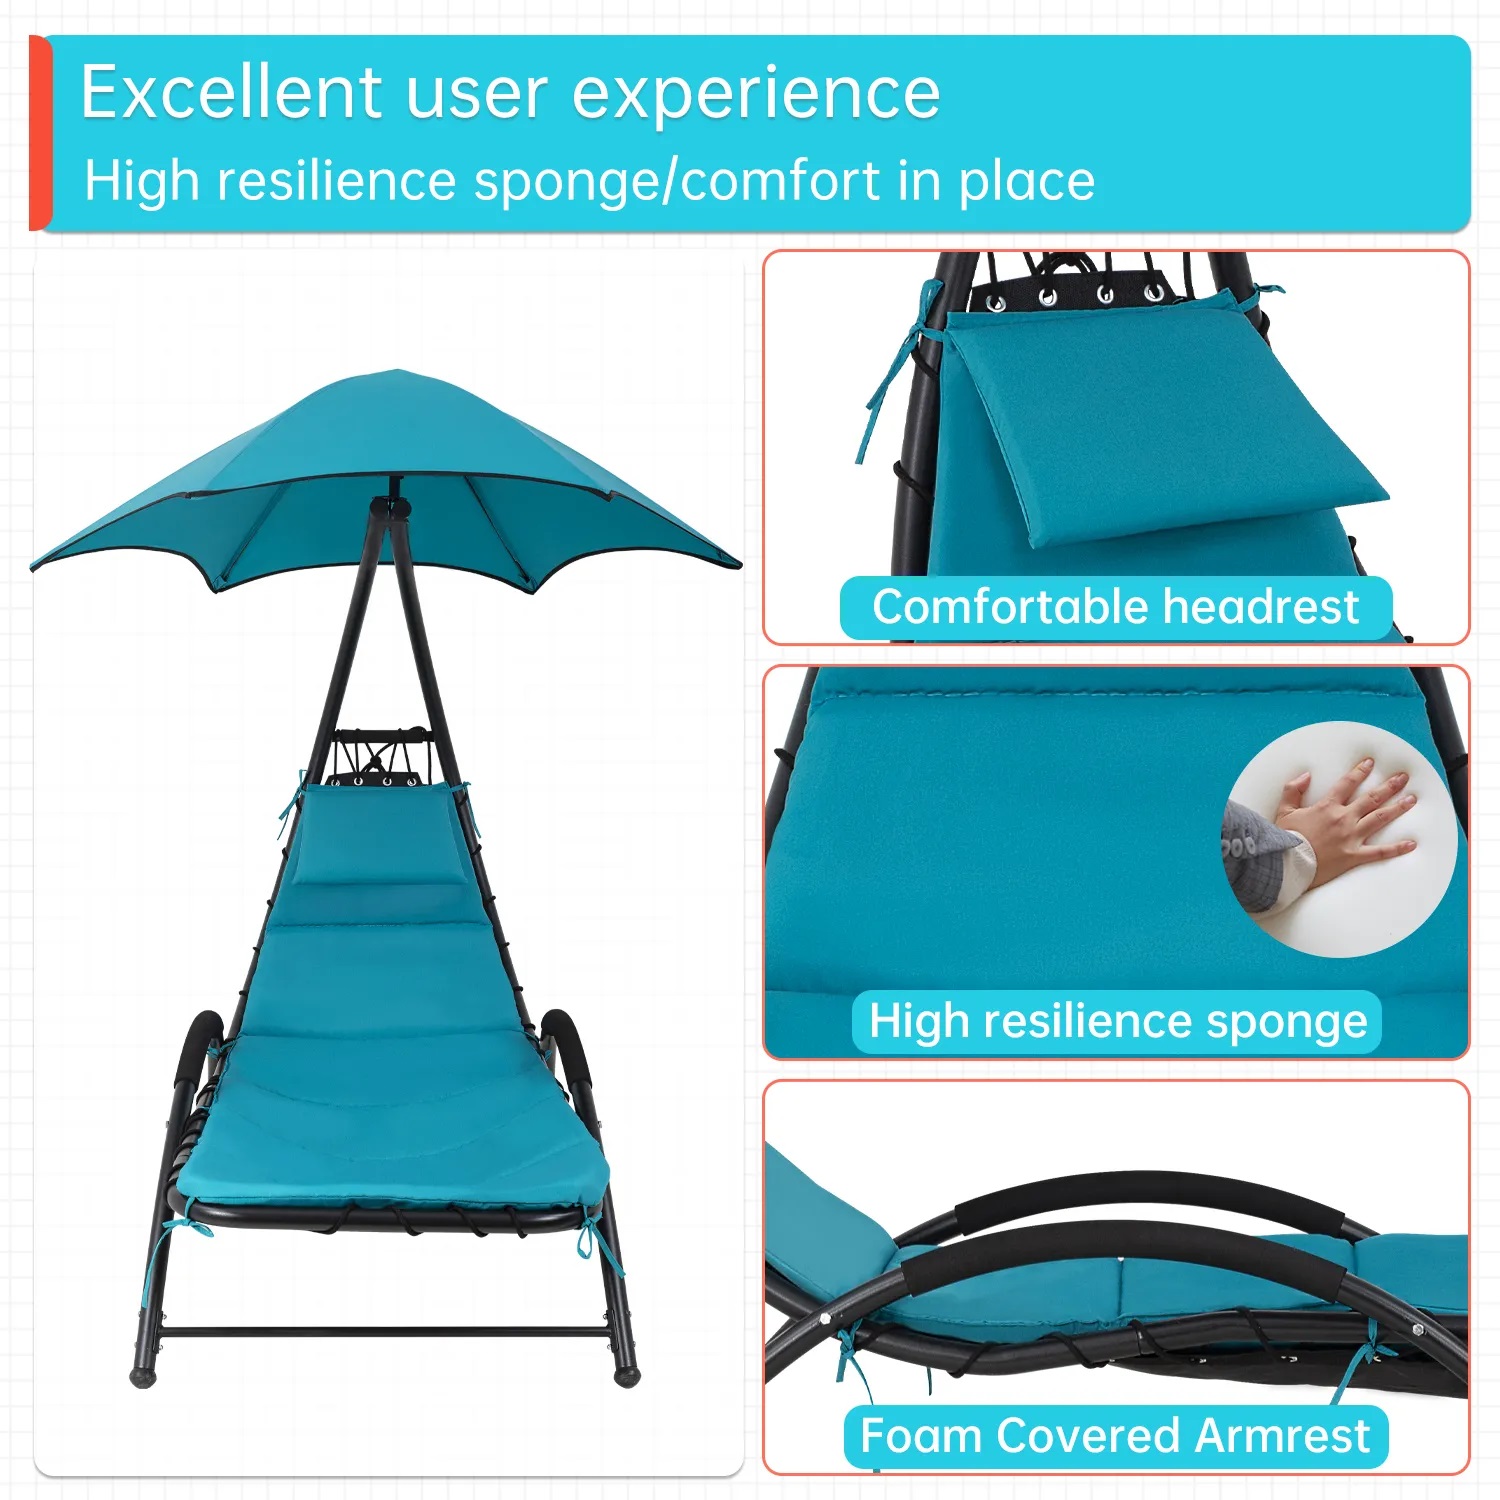 YRLLENSDAN Patio Swing Chair, Lounge Chair Outdoors with Waterproof Canopy Hammock Chair Patio Chair Arc Stand Removable Cushion and Headrest (Blue) - image 4 of 7